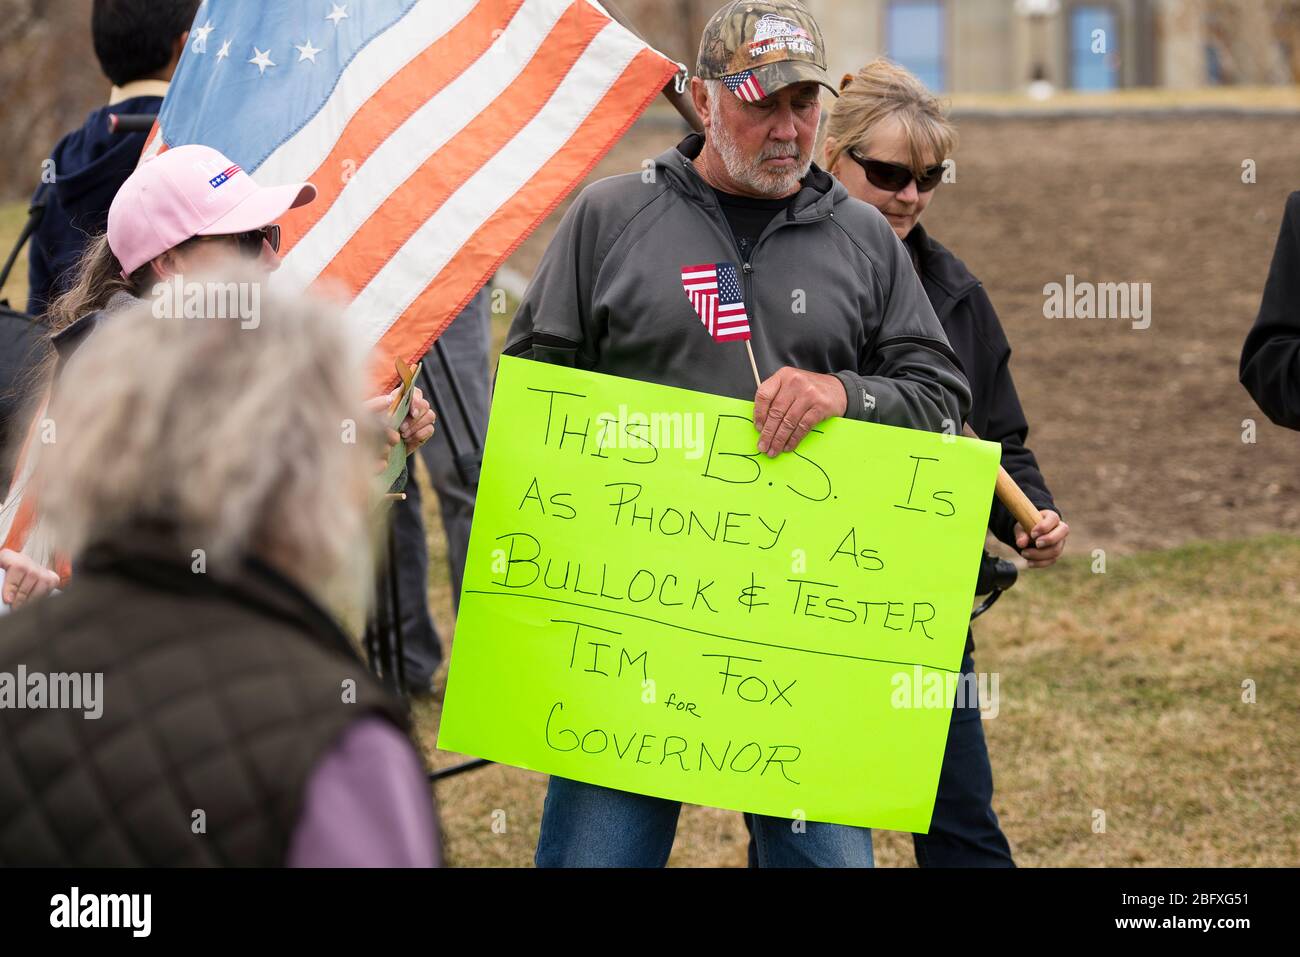 Helena, Montana - April 19, 2020: A demonstrator holds a neon sign in dislike of the governor at a protest of the government shutdown at the Capitol. Stock Photo